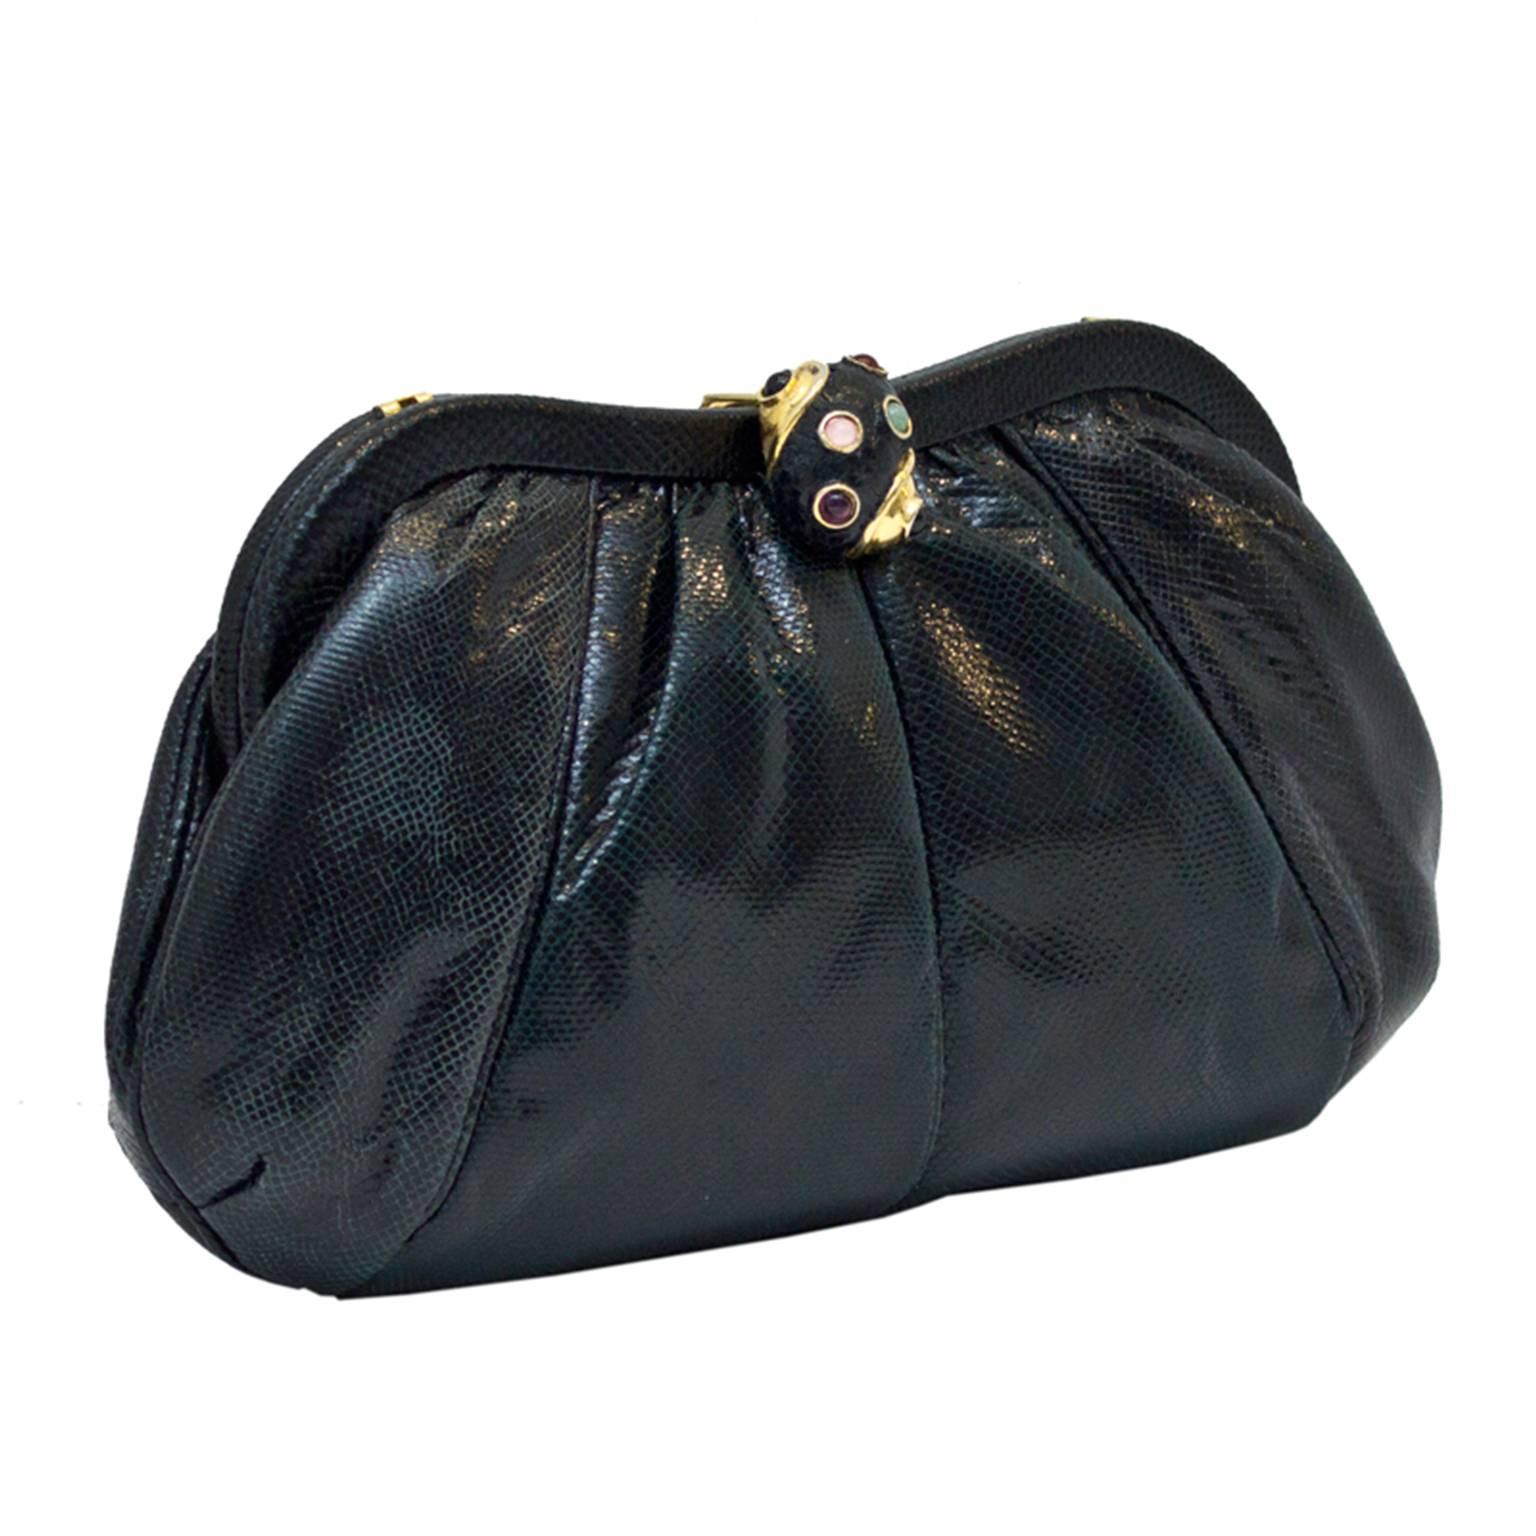 The best evening bag for your dollar. Classic python Judith Leiber clutch with cabochon studded python covered clasp. Leather interior, very good vintage condition.

Length 8.5